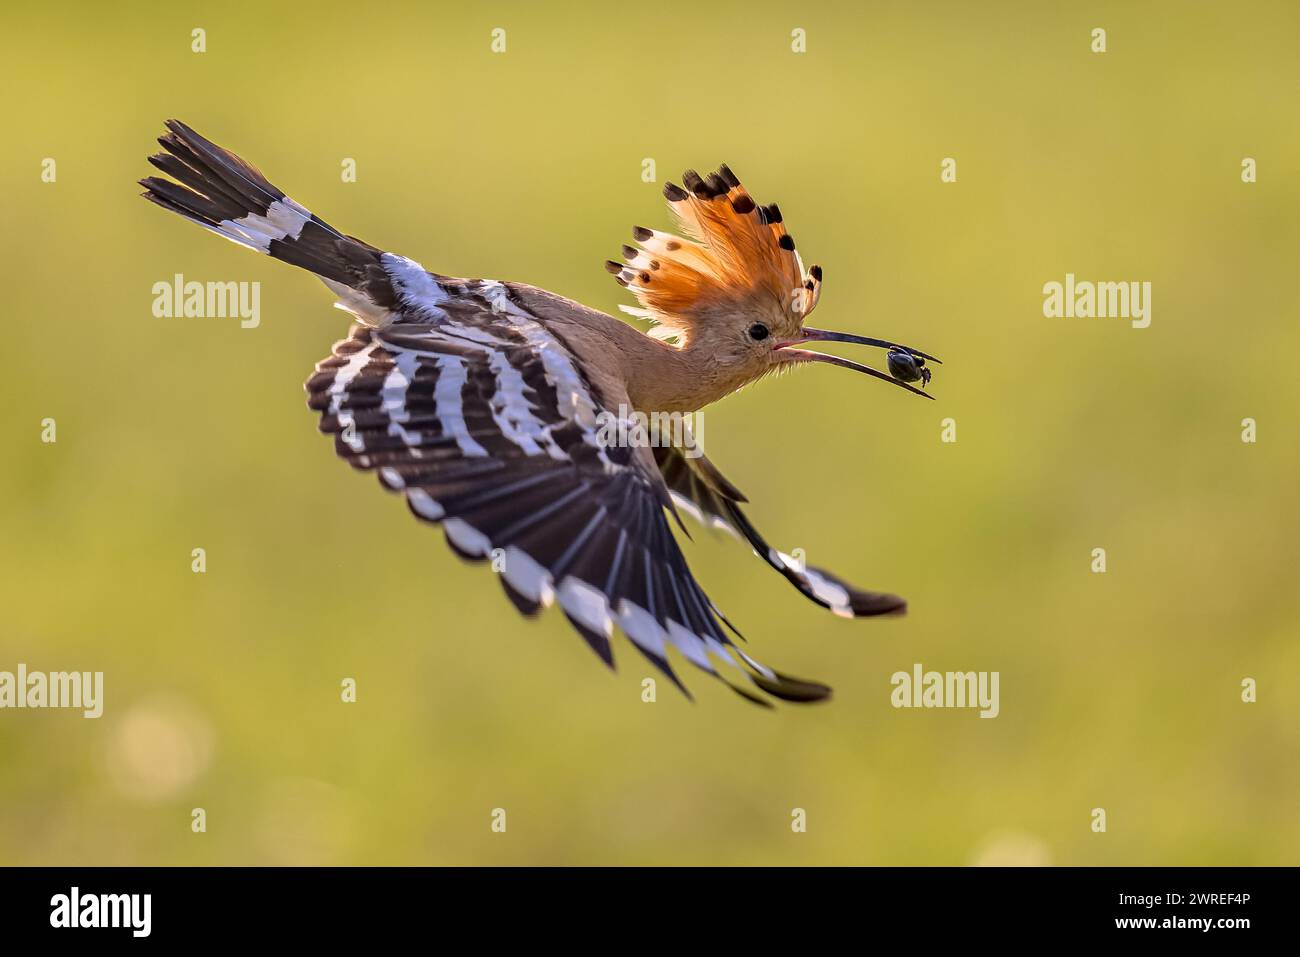 Eurasian hoopoe (Upupa epops) bird with beetle insect in beak and raised crest. One of the most beautiful birds of Europe aproaching nesting site. Wil Stock Photo